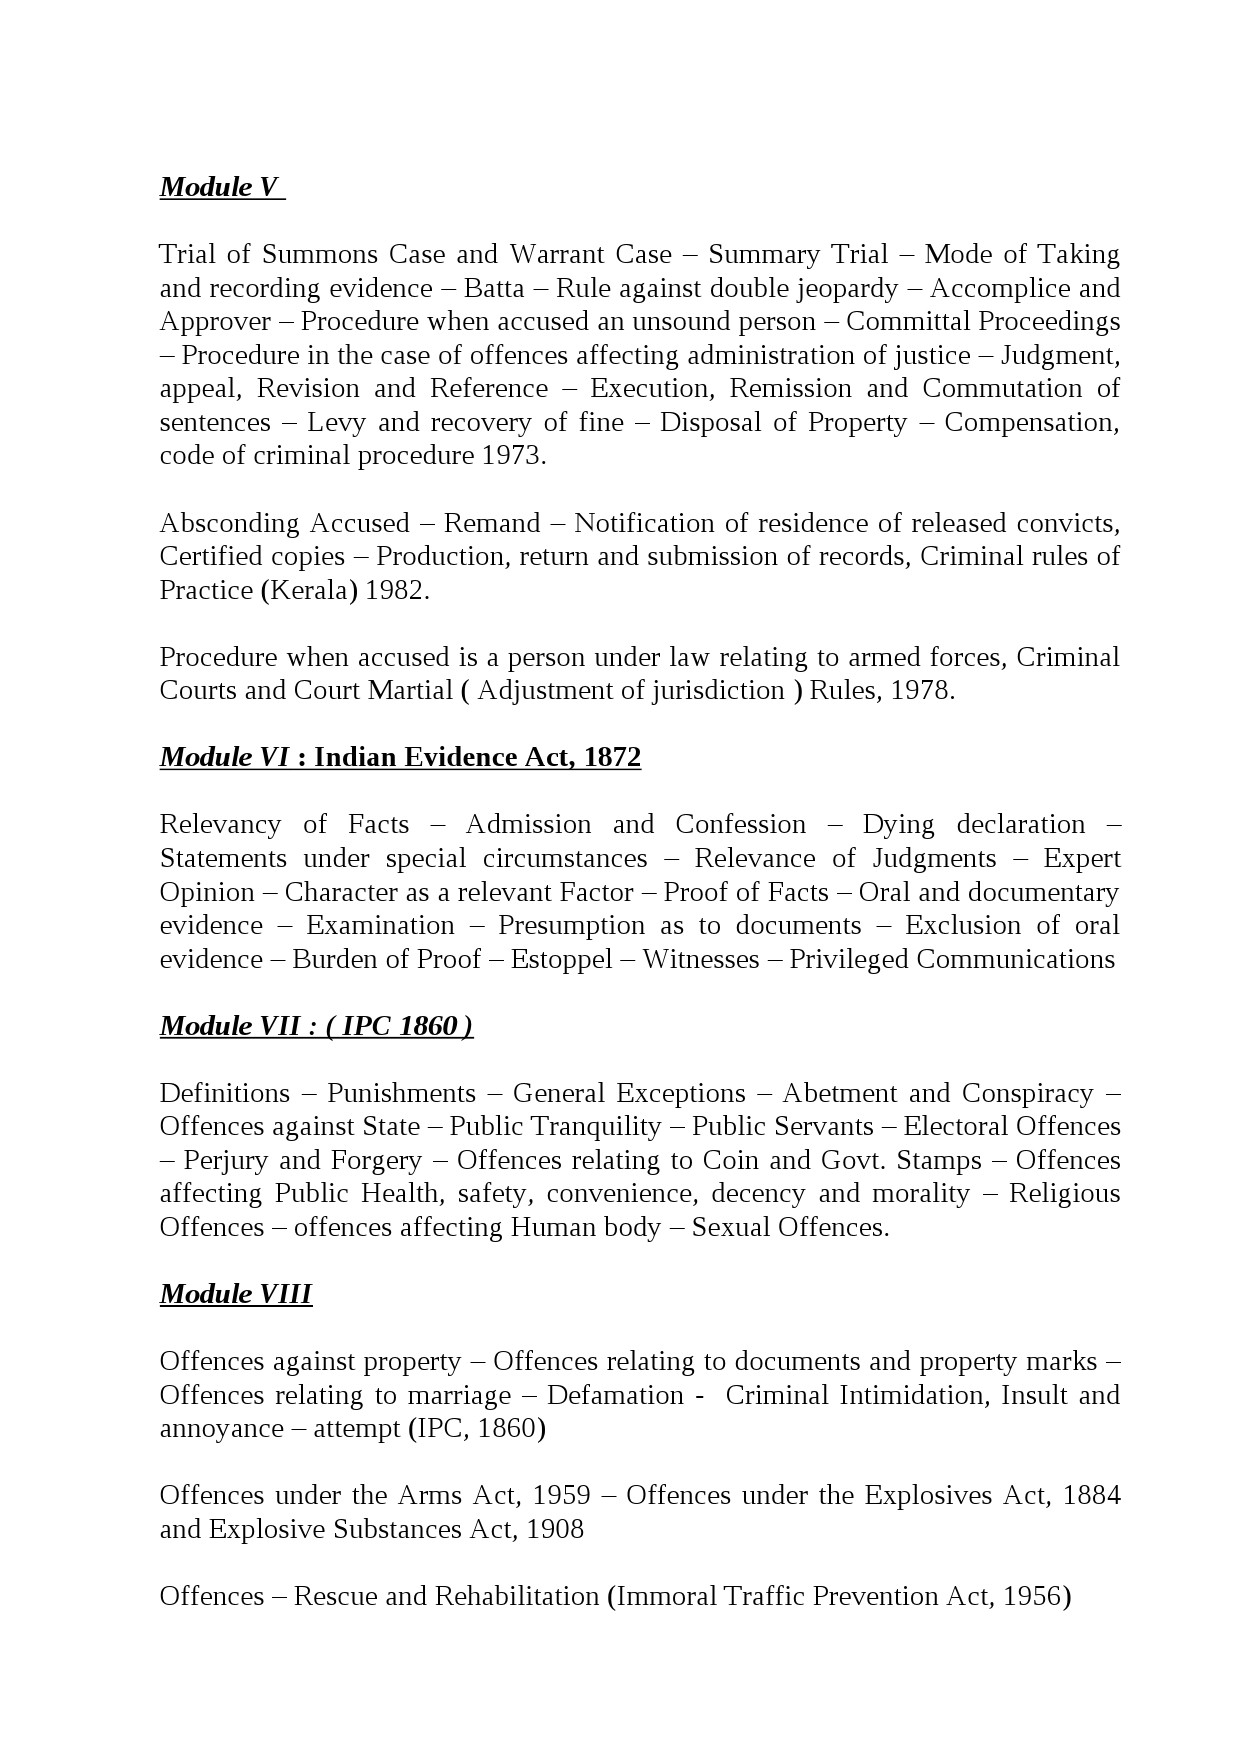 Syllabus for Exams with LLB as Qualification - Notification Image 11